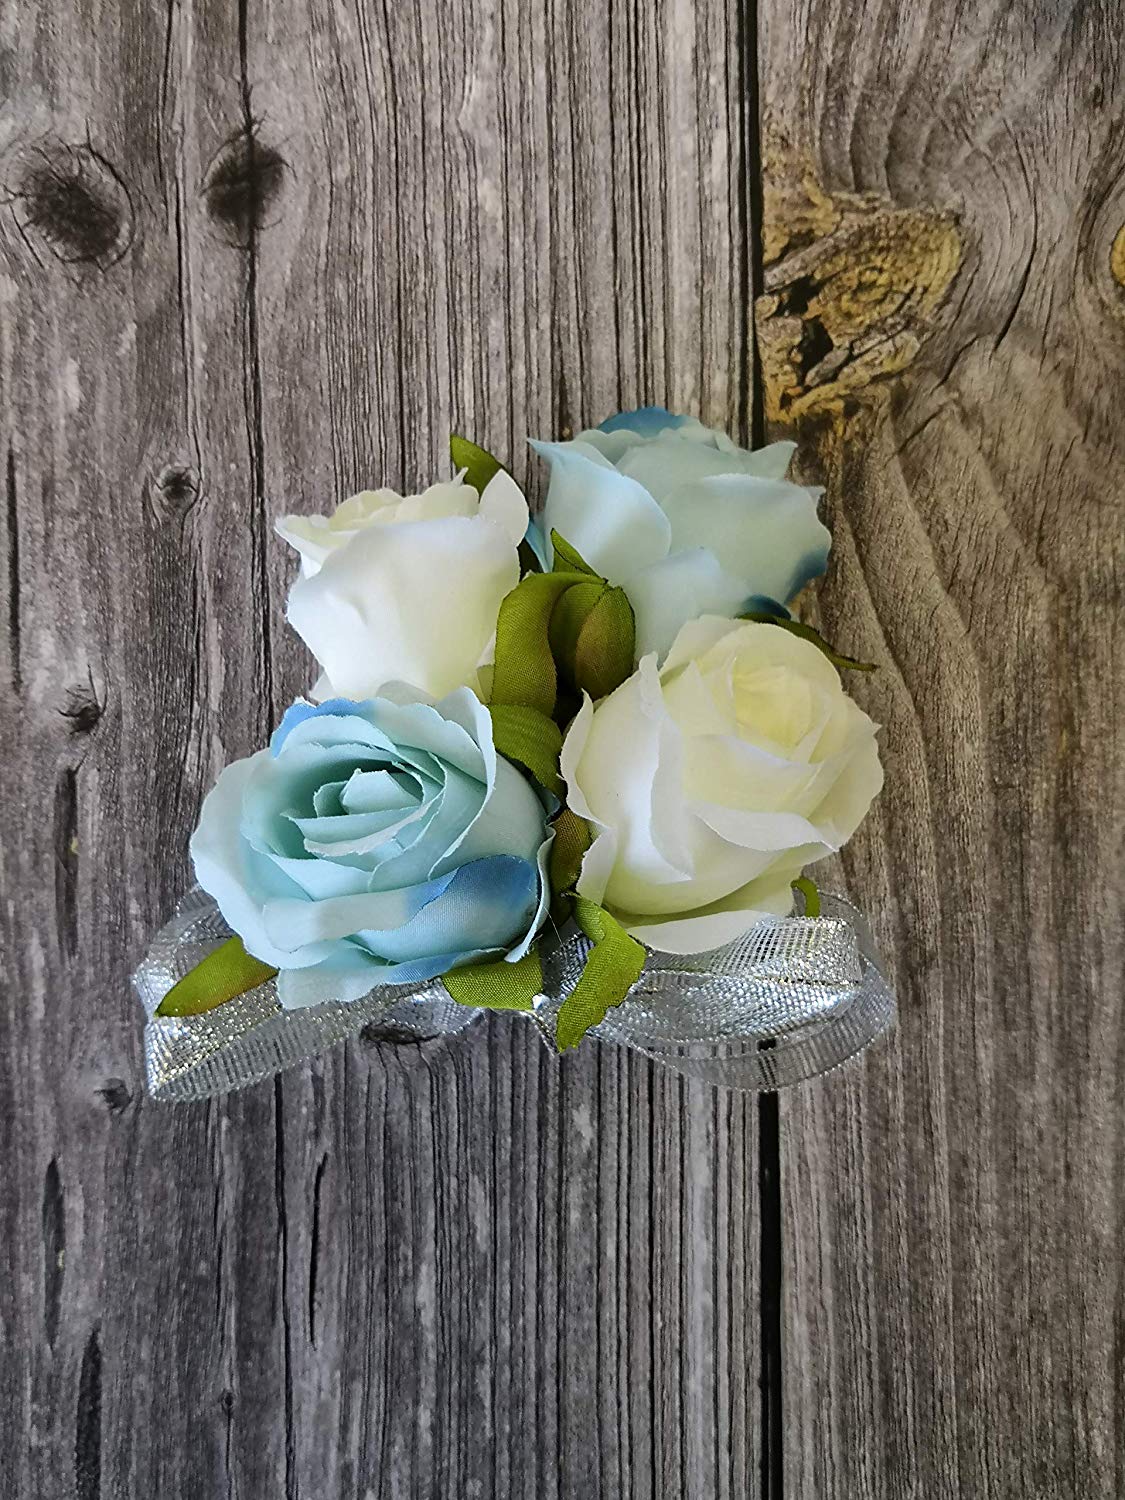 Rose Corsage Boutonniere Set Real Touch Flowers for Party Ball Dancing ... White And Baby Blue Corsage